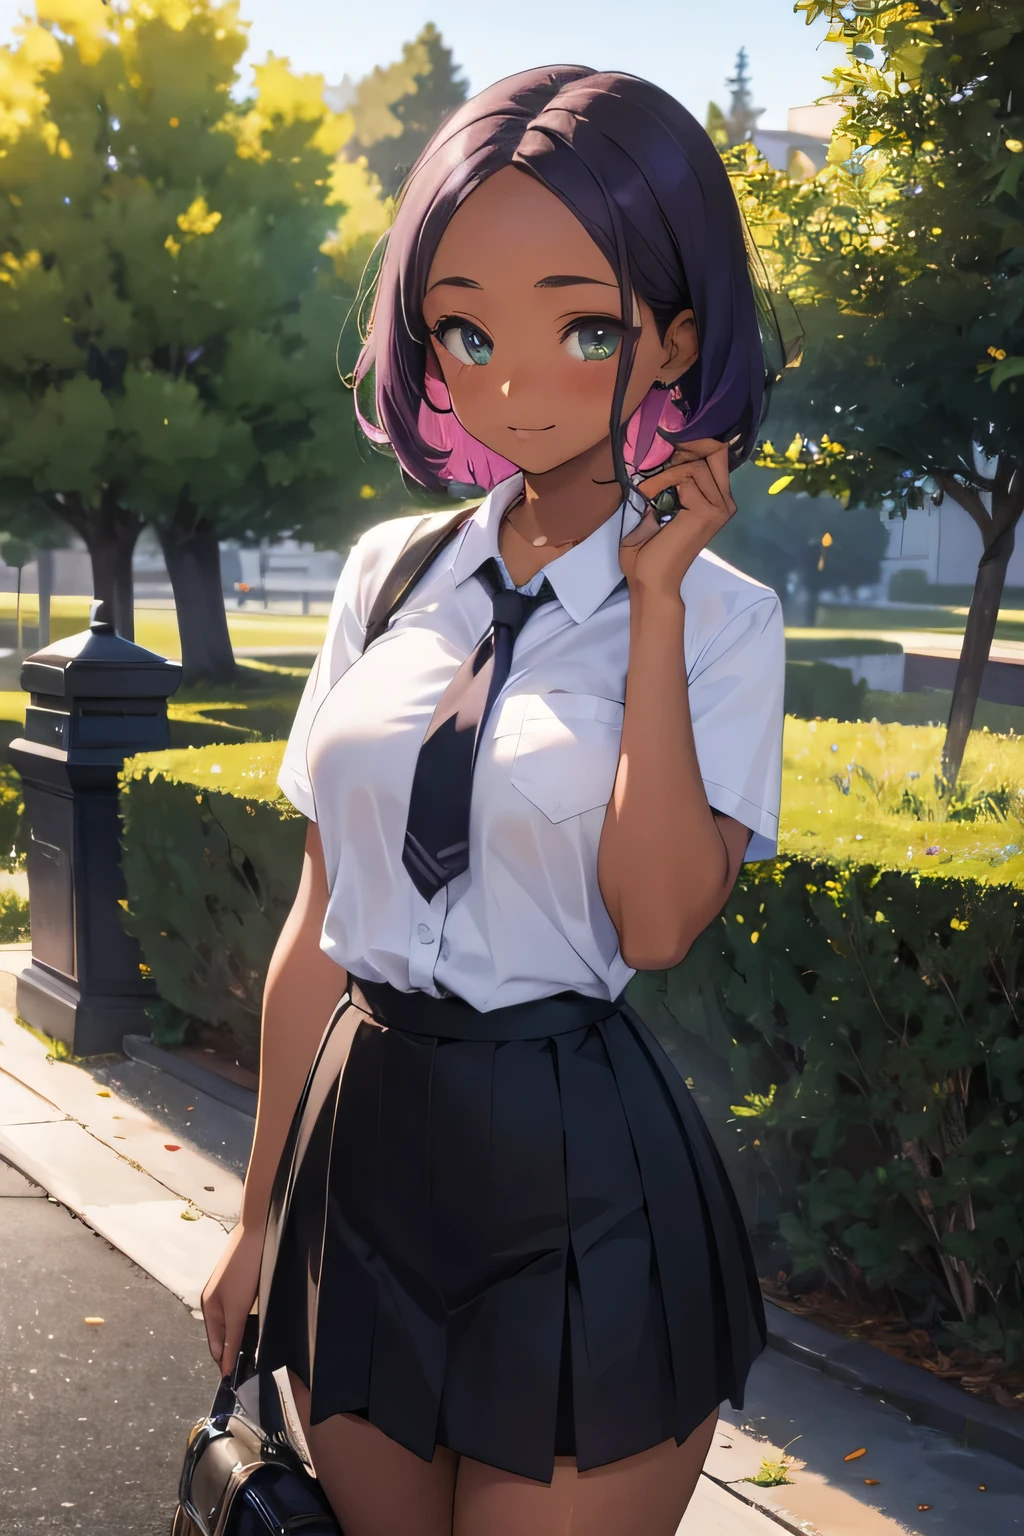 1 girl, single girl, cute, dark skin, tanned skin, short purple hair, green eyes, blushing, chubby, somewhat large breasts, high , black skirt up to the knees, high school, park